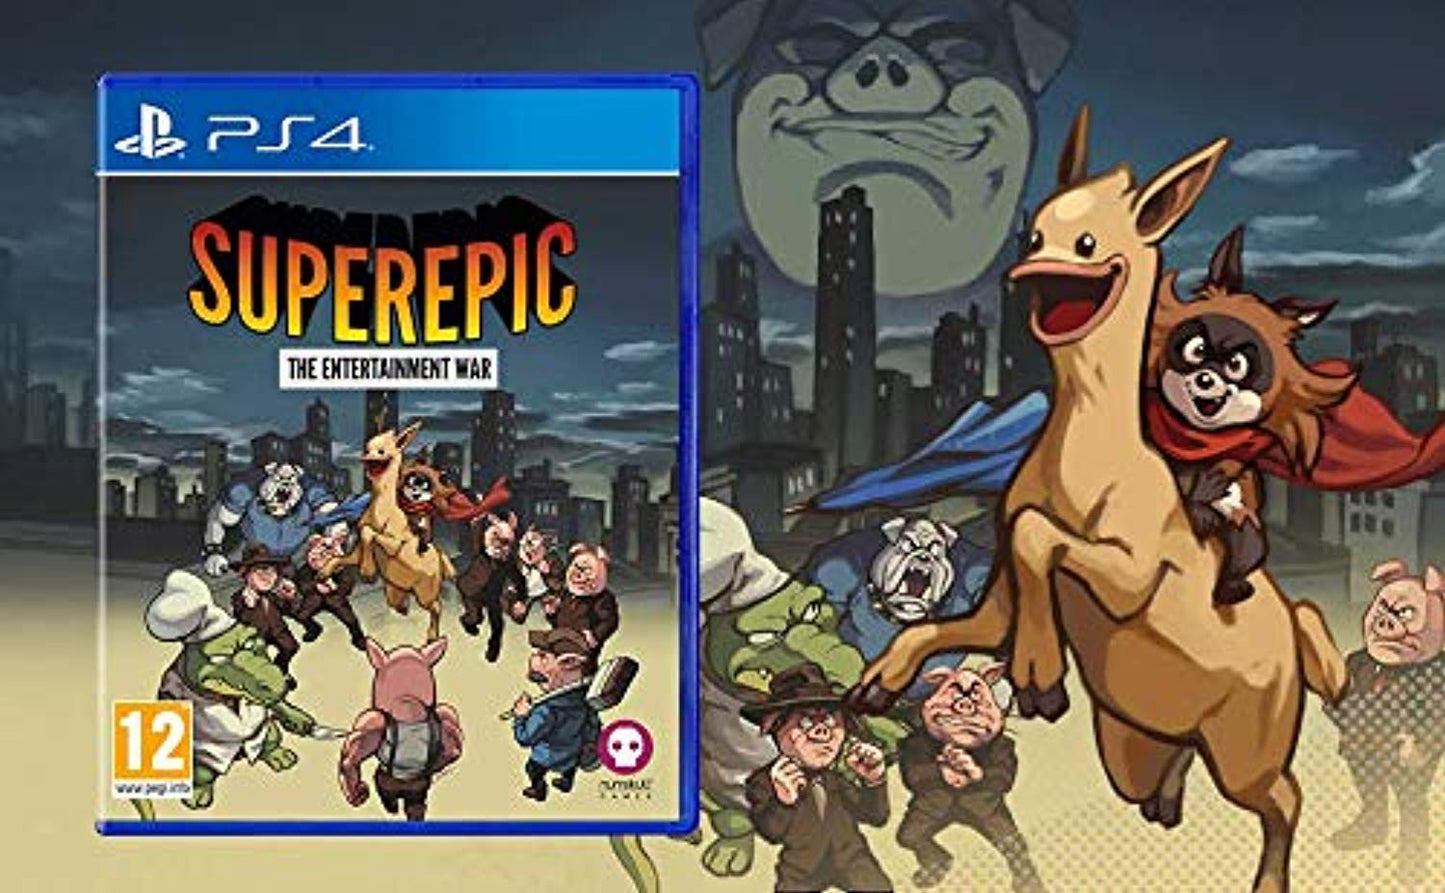 SuperEpic: The Entertainment War (PS4) - Offer Games